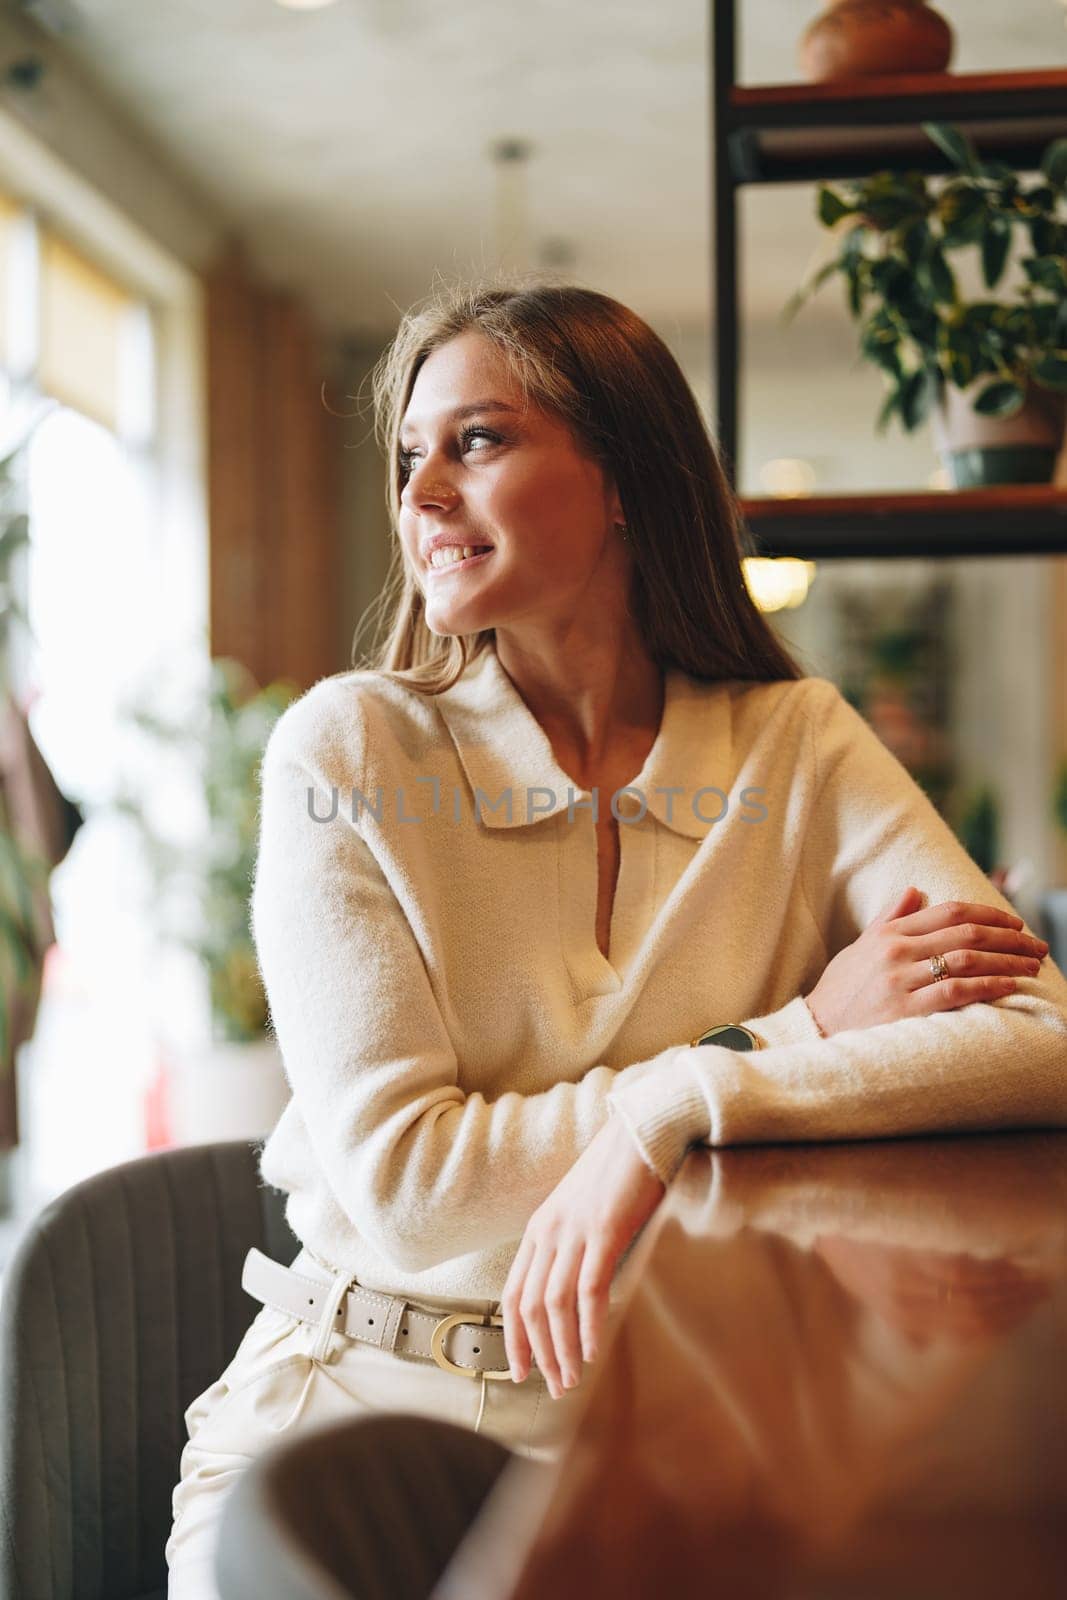 A young woman with a subtle smile is standing in a warmly lit cafe. She exudes confidence and a casual elegance, dressed in a chic white blouse. The cafes casual atmosphere is enhanced by potted plants and natural light.